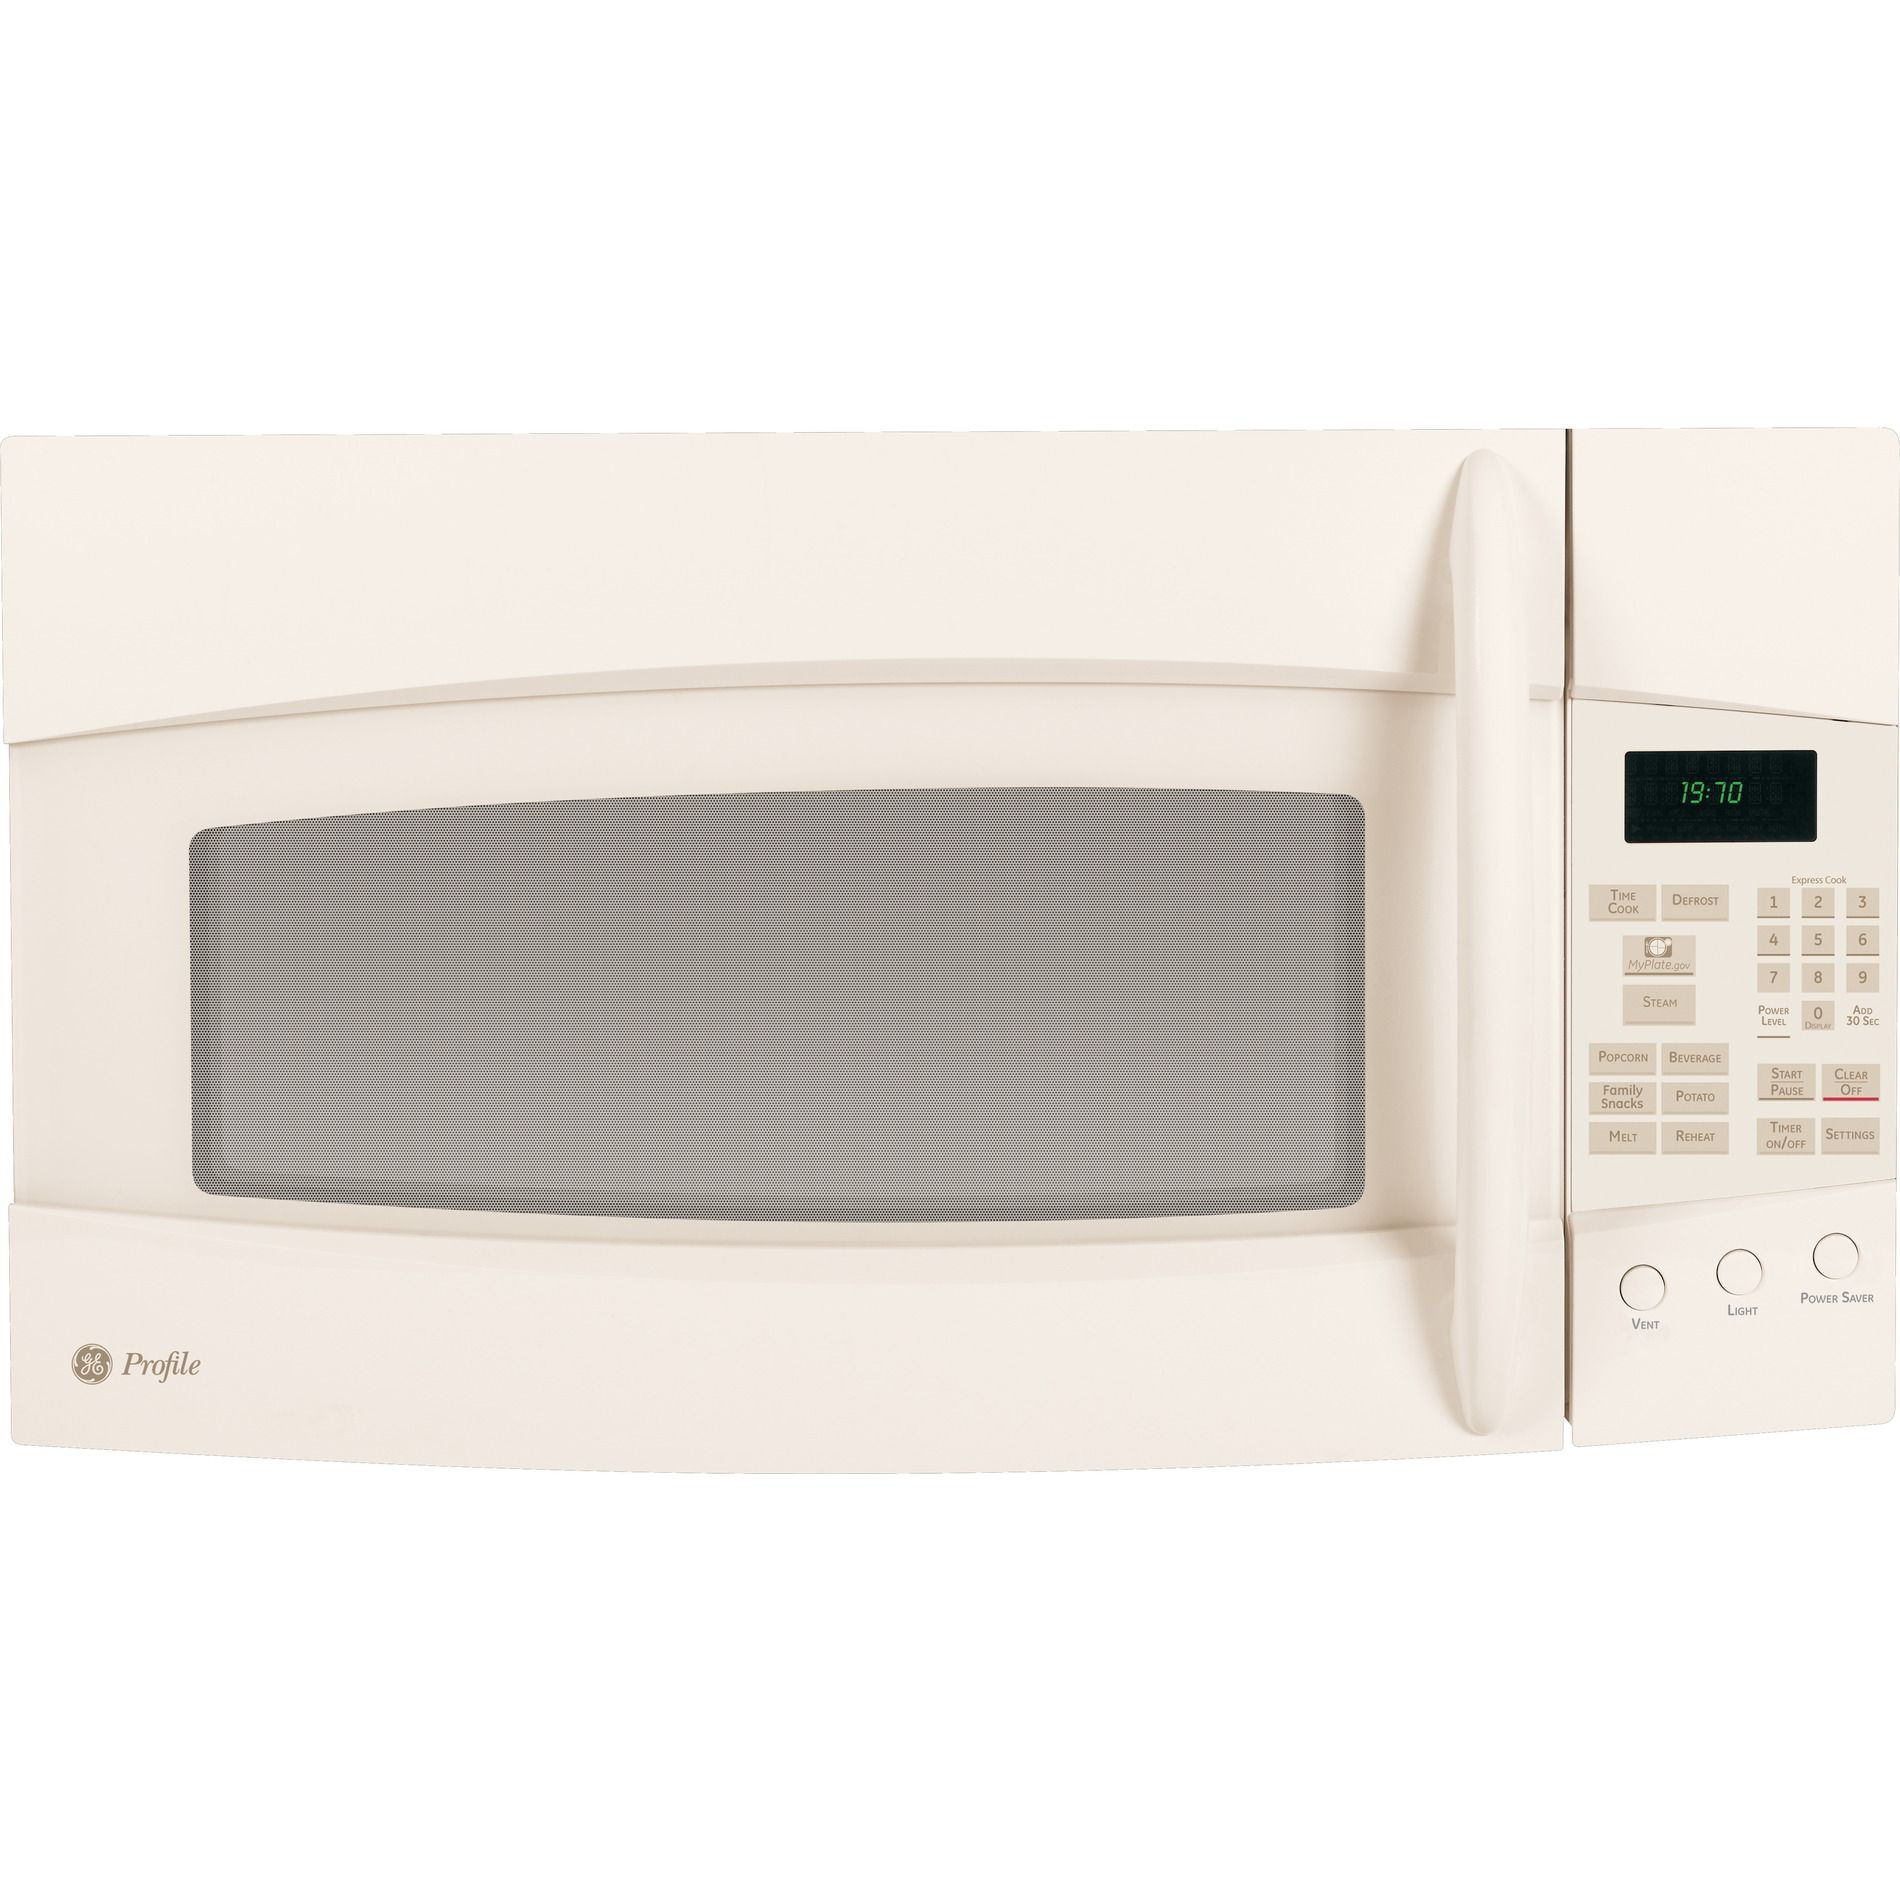 Over The Range Microwave Bisque
 GE Appliances PVM1970DRCC Profile™ Series 1 9 cu ft Over